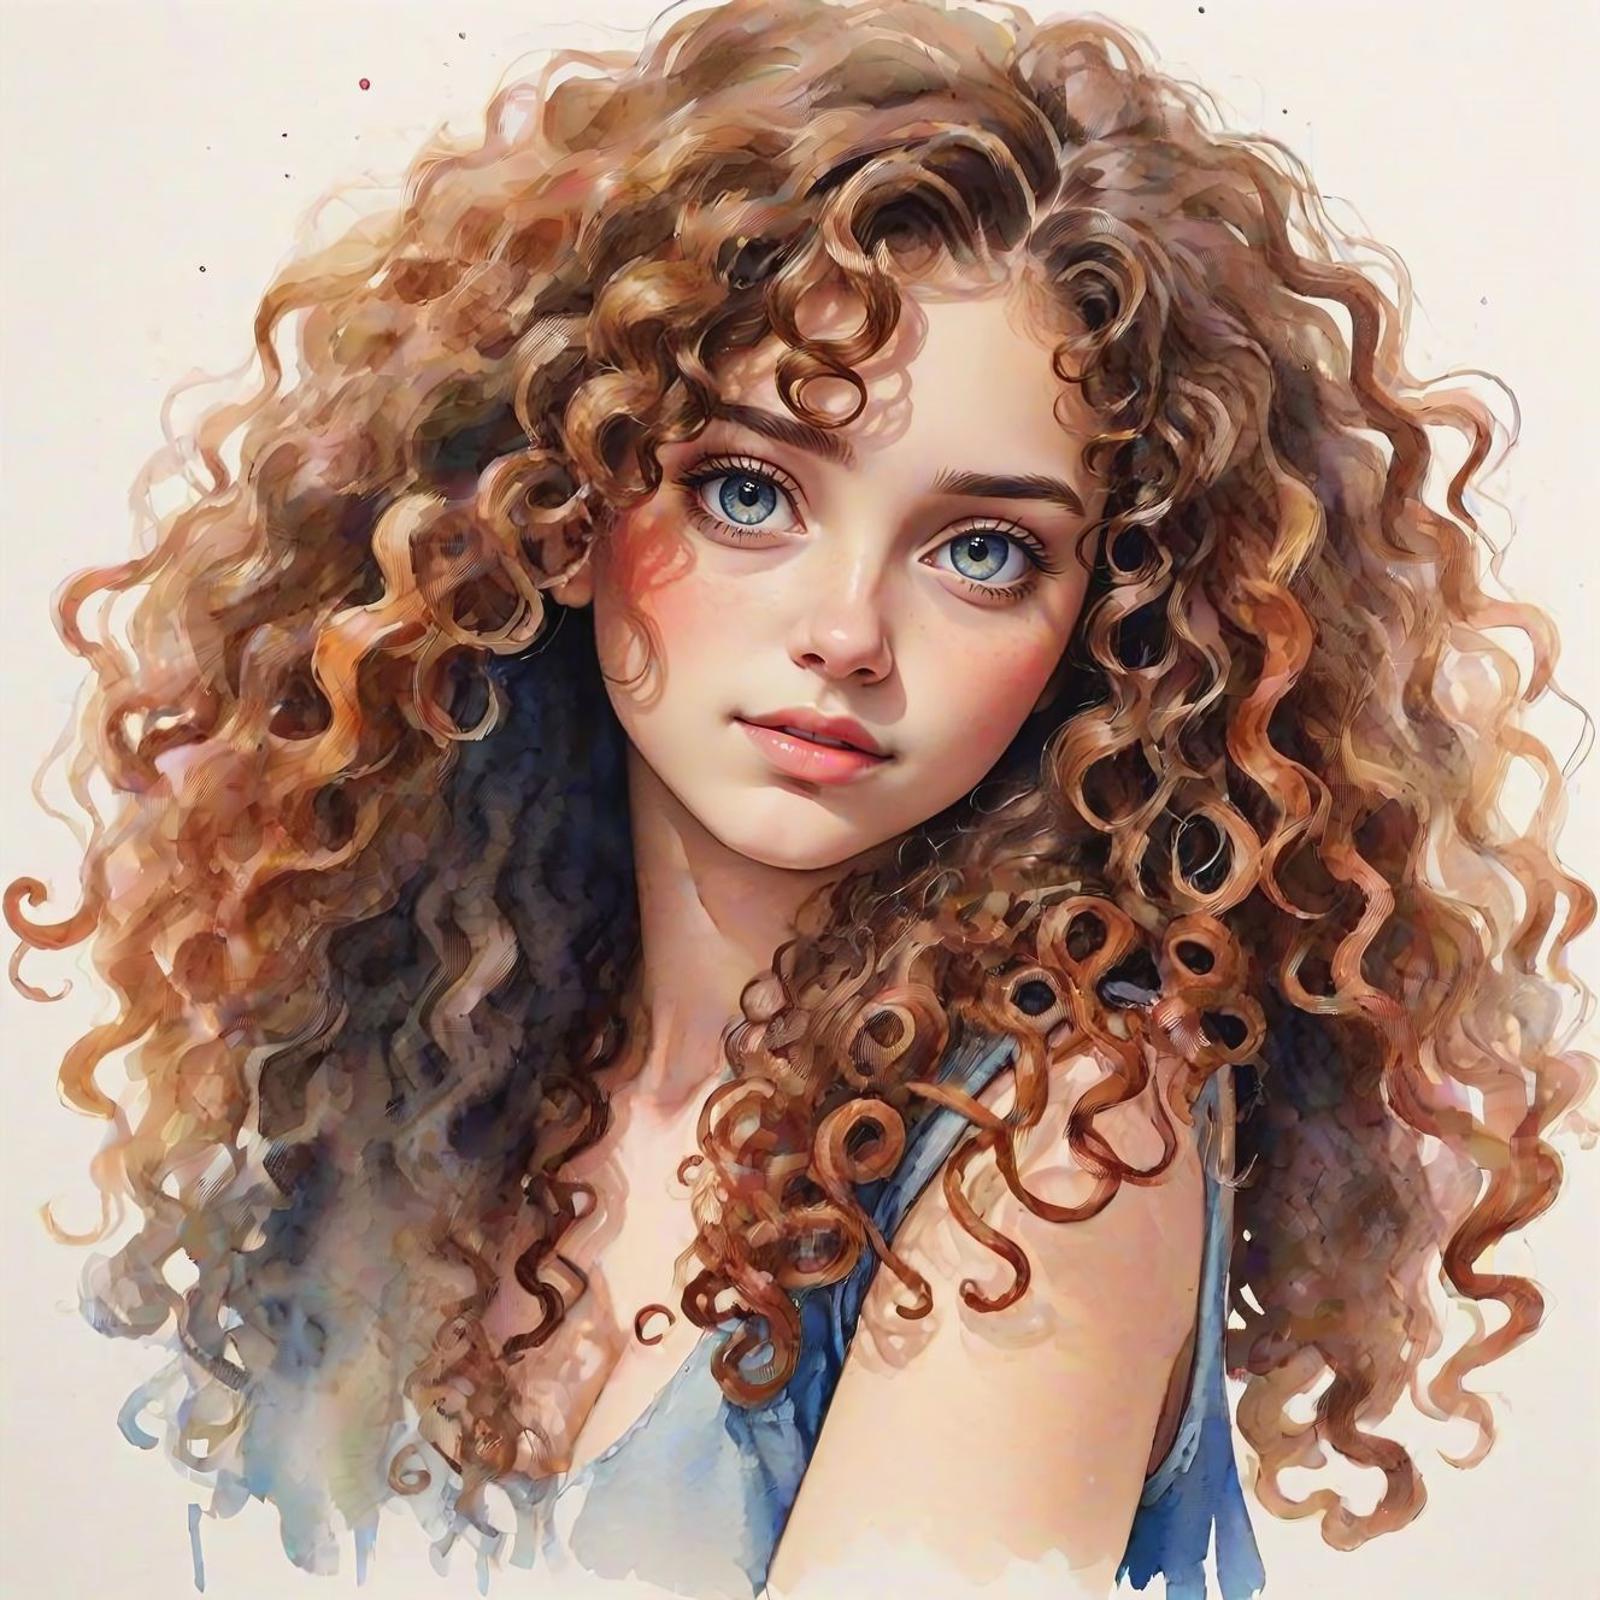 A painting of a woman with long curly hair and blue eyes.